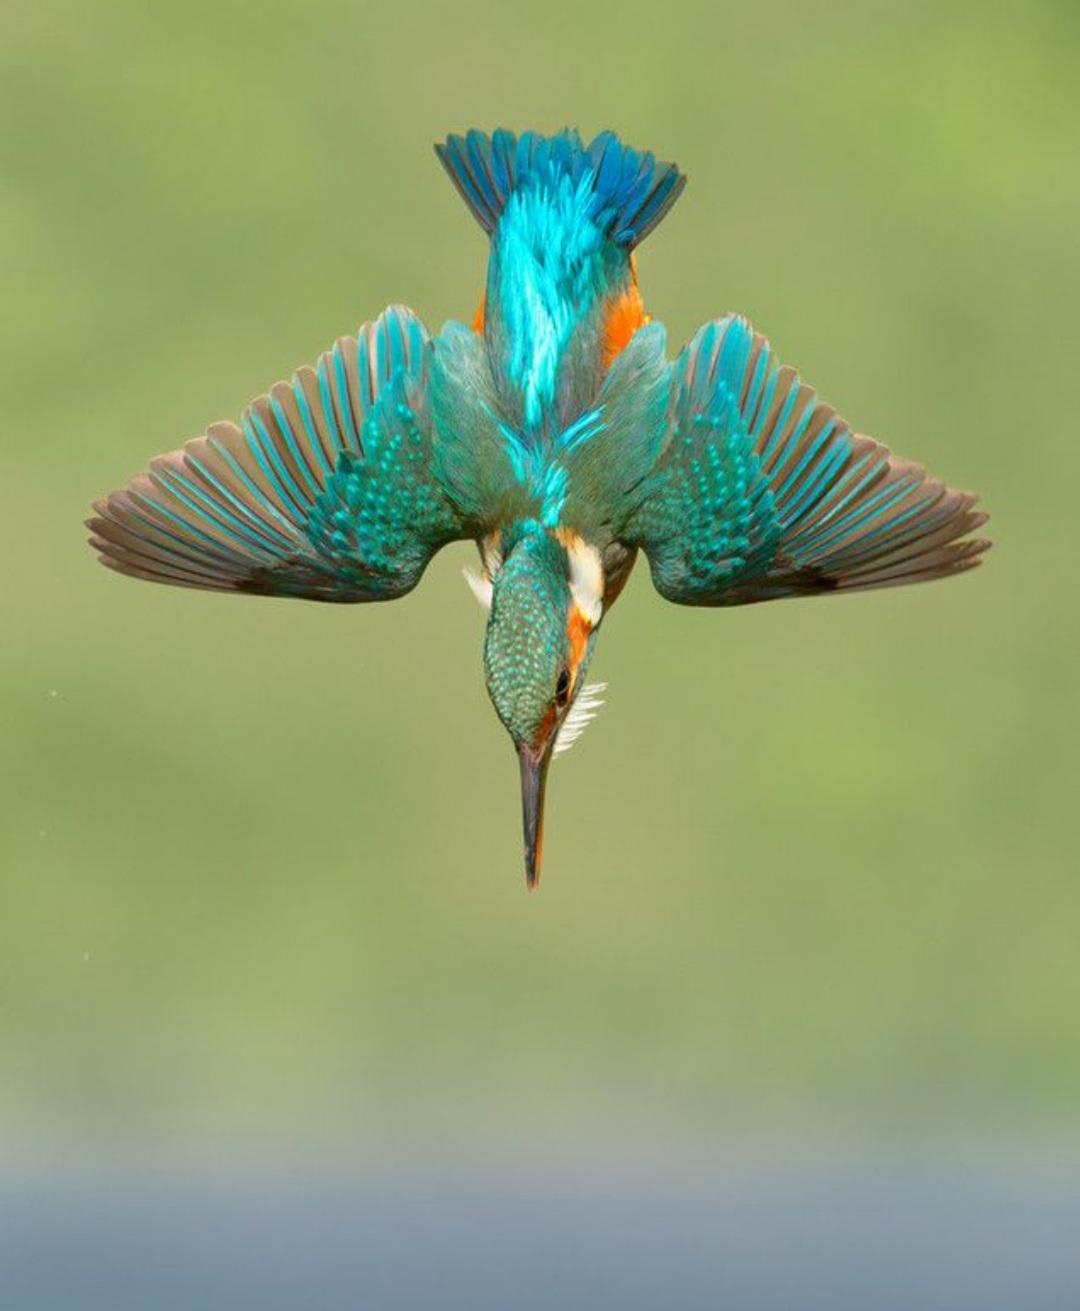 The design of a kingfisher’s beak is aerodynamically efficient, allowing it to dive from its perch, towards its prey, with maximum speed and minimum splash. In fact, the beak design is so clever that the front of many Japanese bullet trains are modelled to mimic it.